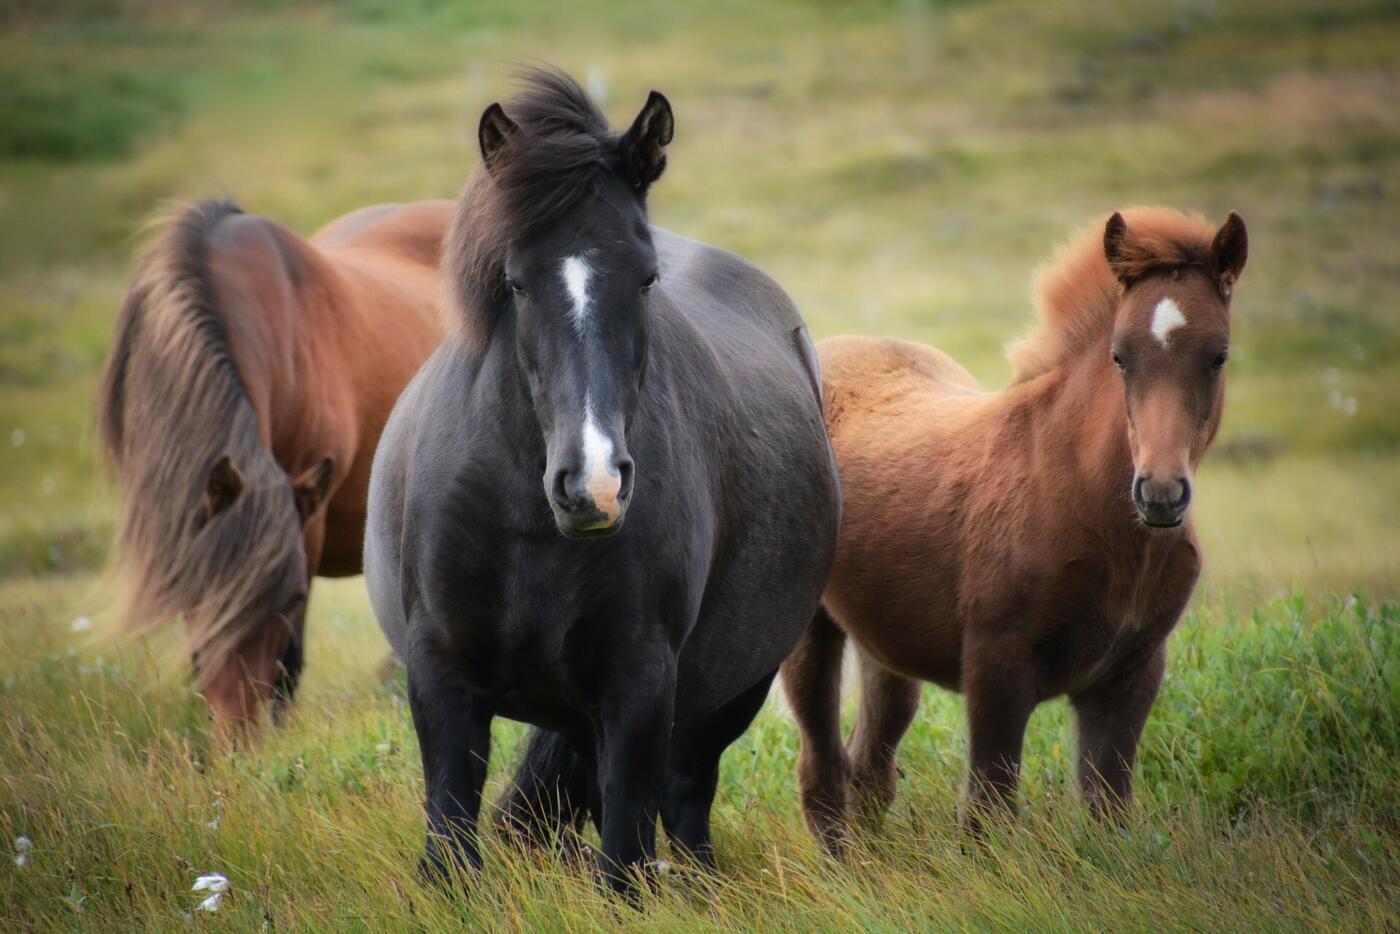 The world of horses: a journey through the diversity of horse breeds